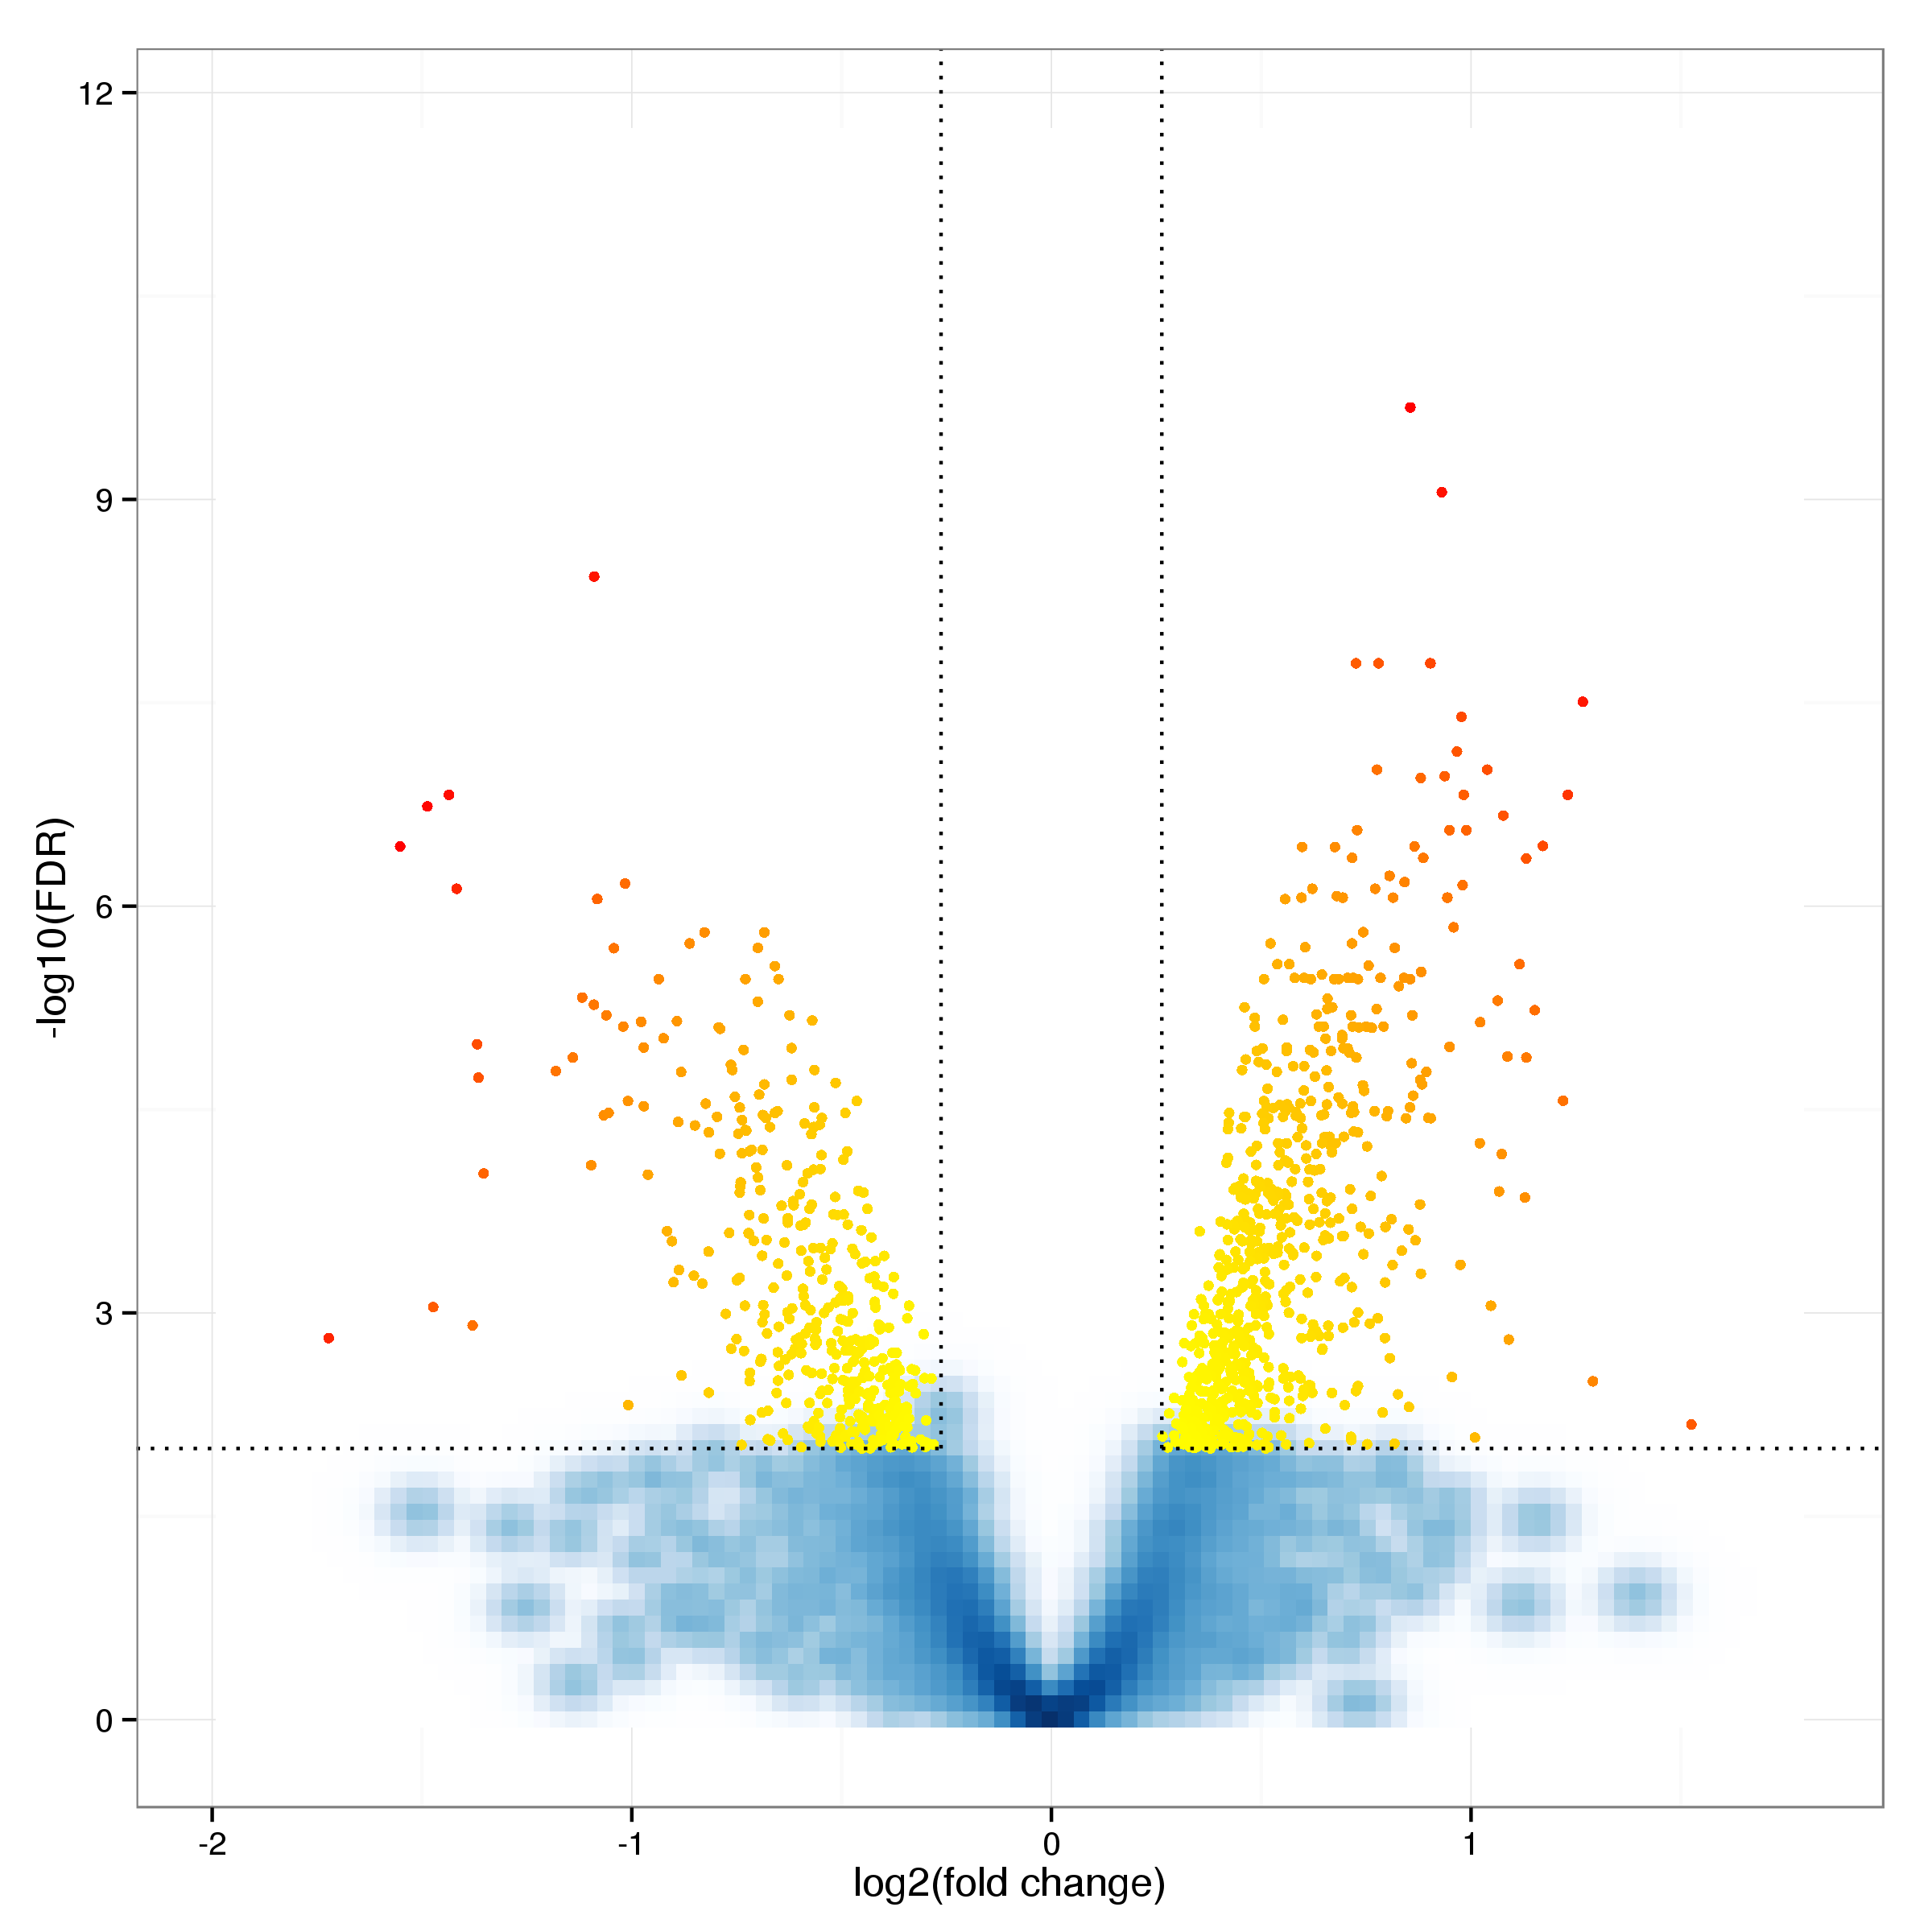 **Figure 17:** Volcano plot of differential expression results between clusters 1 and 2. Probes with an adjusted p-value below 0.01 and a log fold cange of at least 0.5 are shown as yellow and red dots.